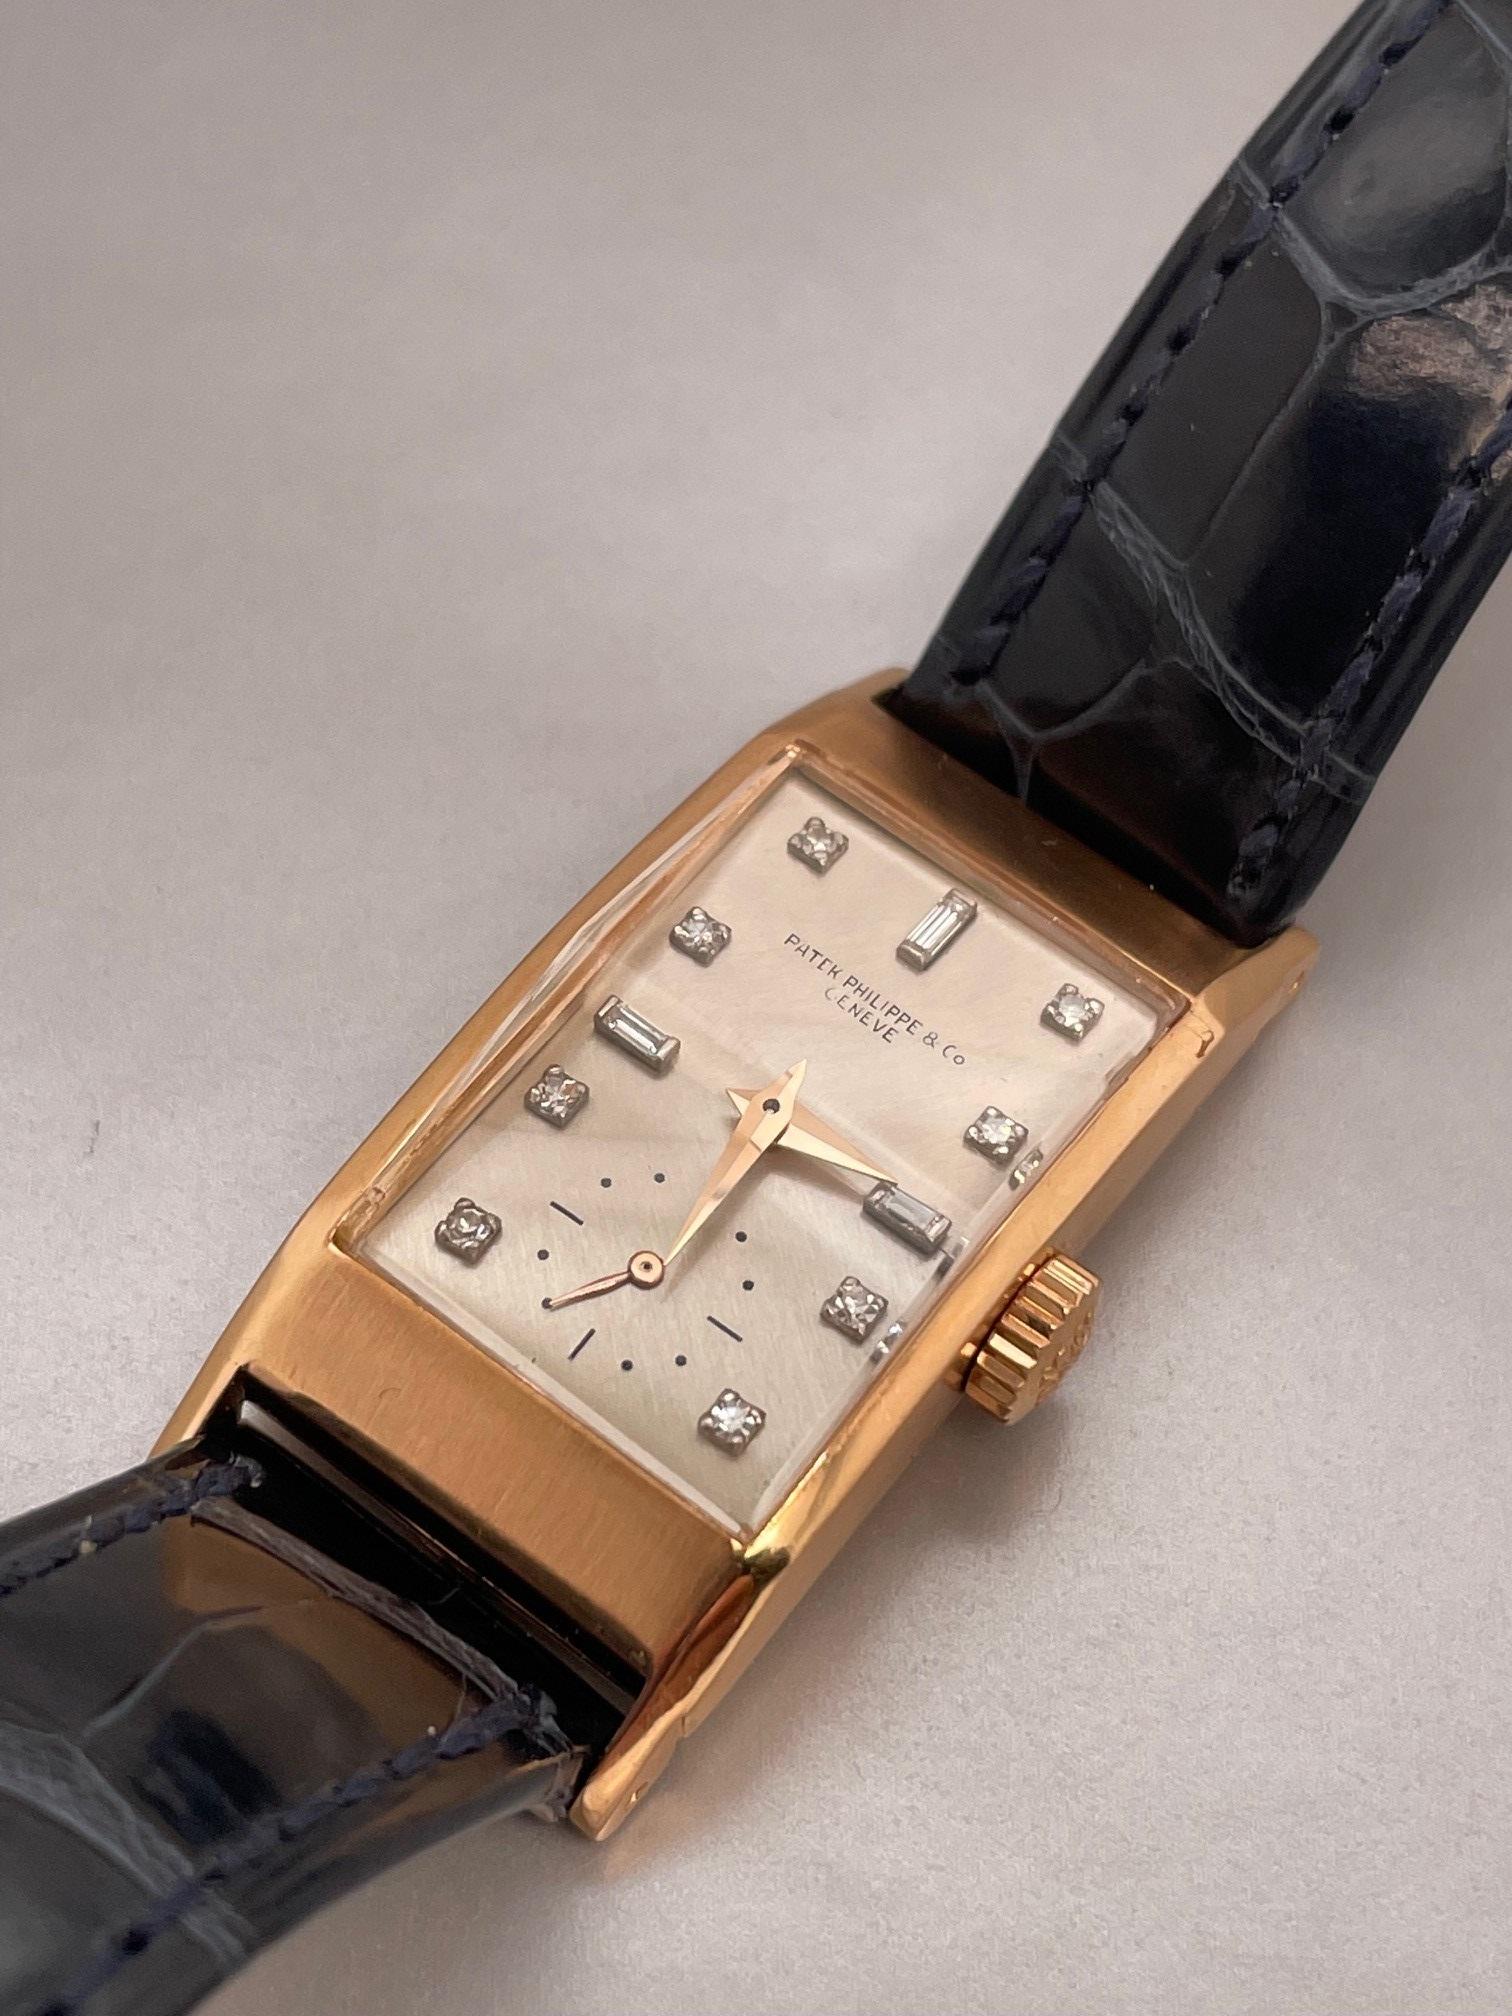 Vintage 18k Rose Gold Patek Philippe rectangular watch featuring a silver dial with diamond hour markers, raised enamel print, original faceted crystal, Patek crown, Watch reference number #2461,  9-90 movement, s#843xxxx, case serial number